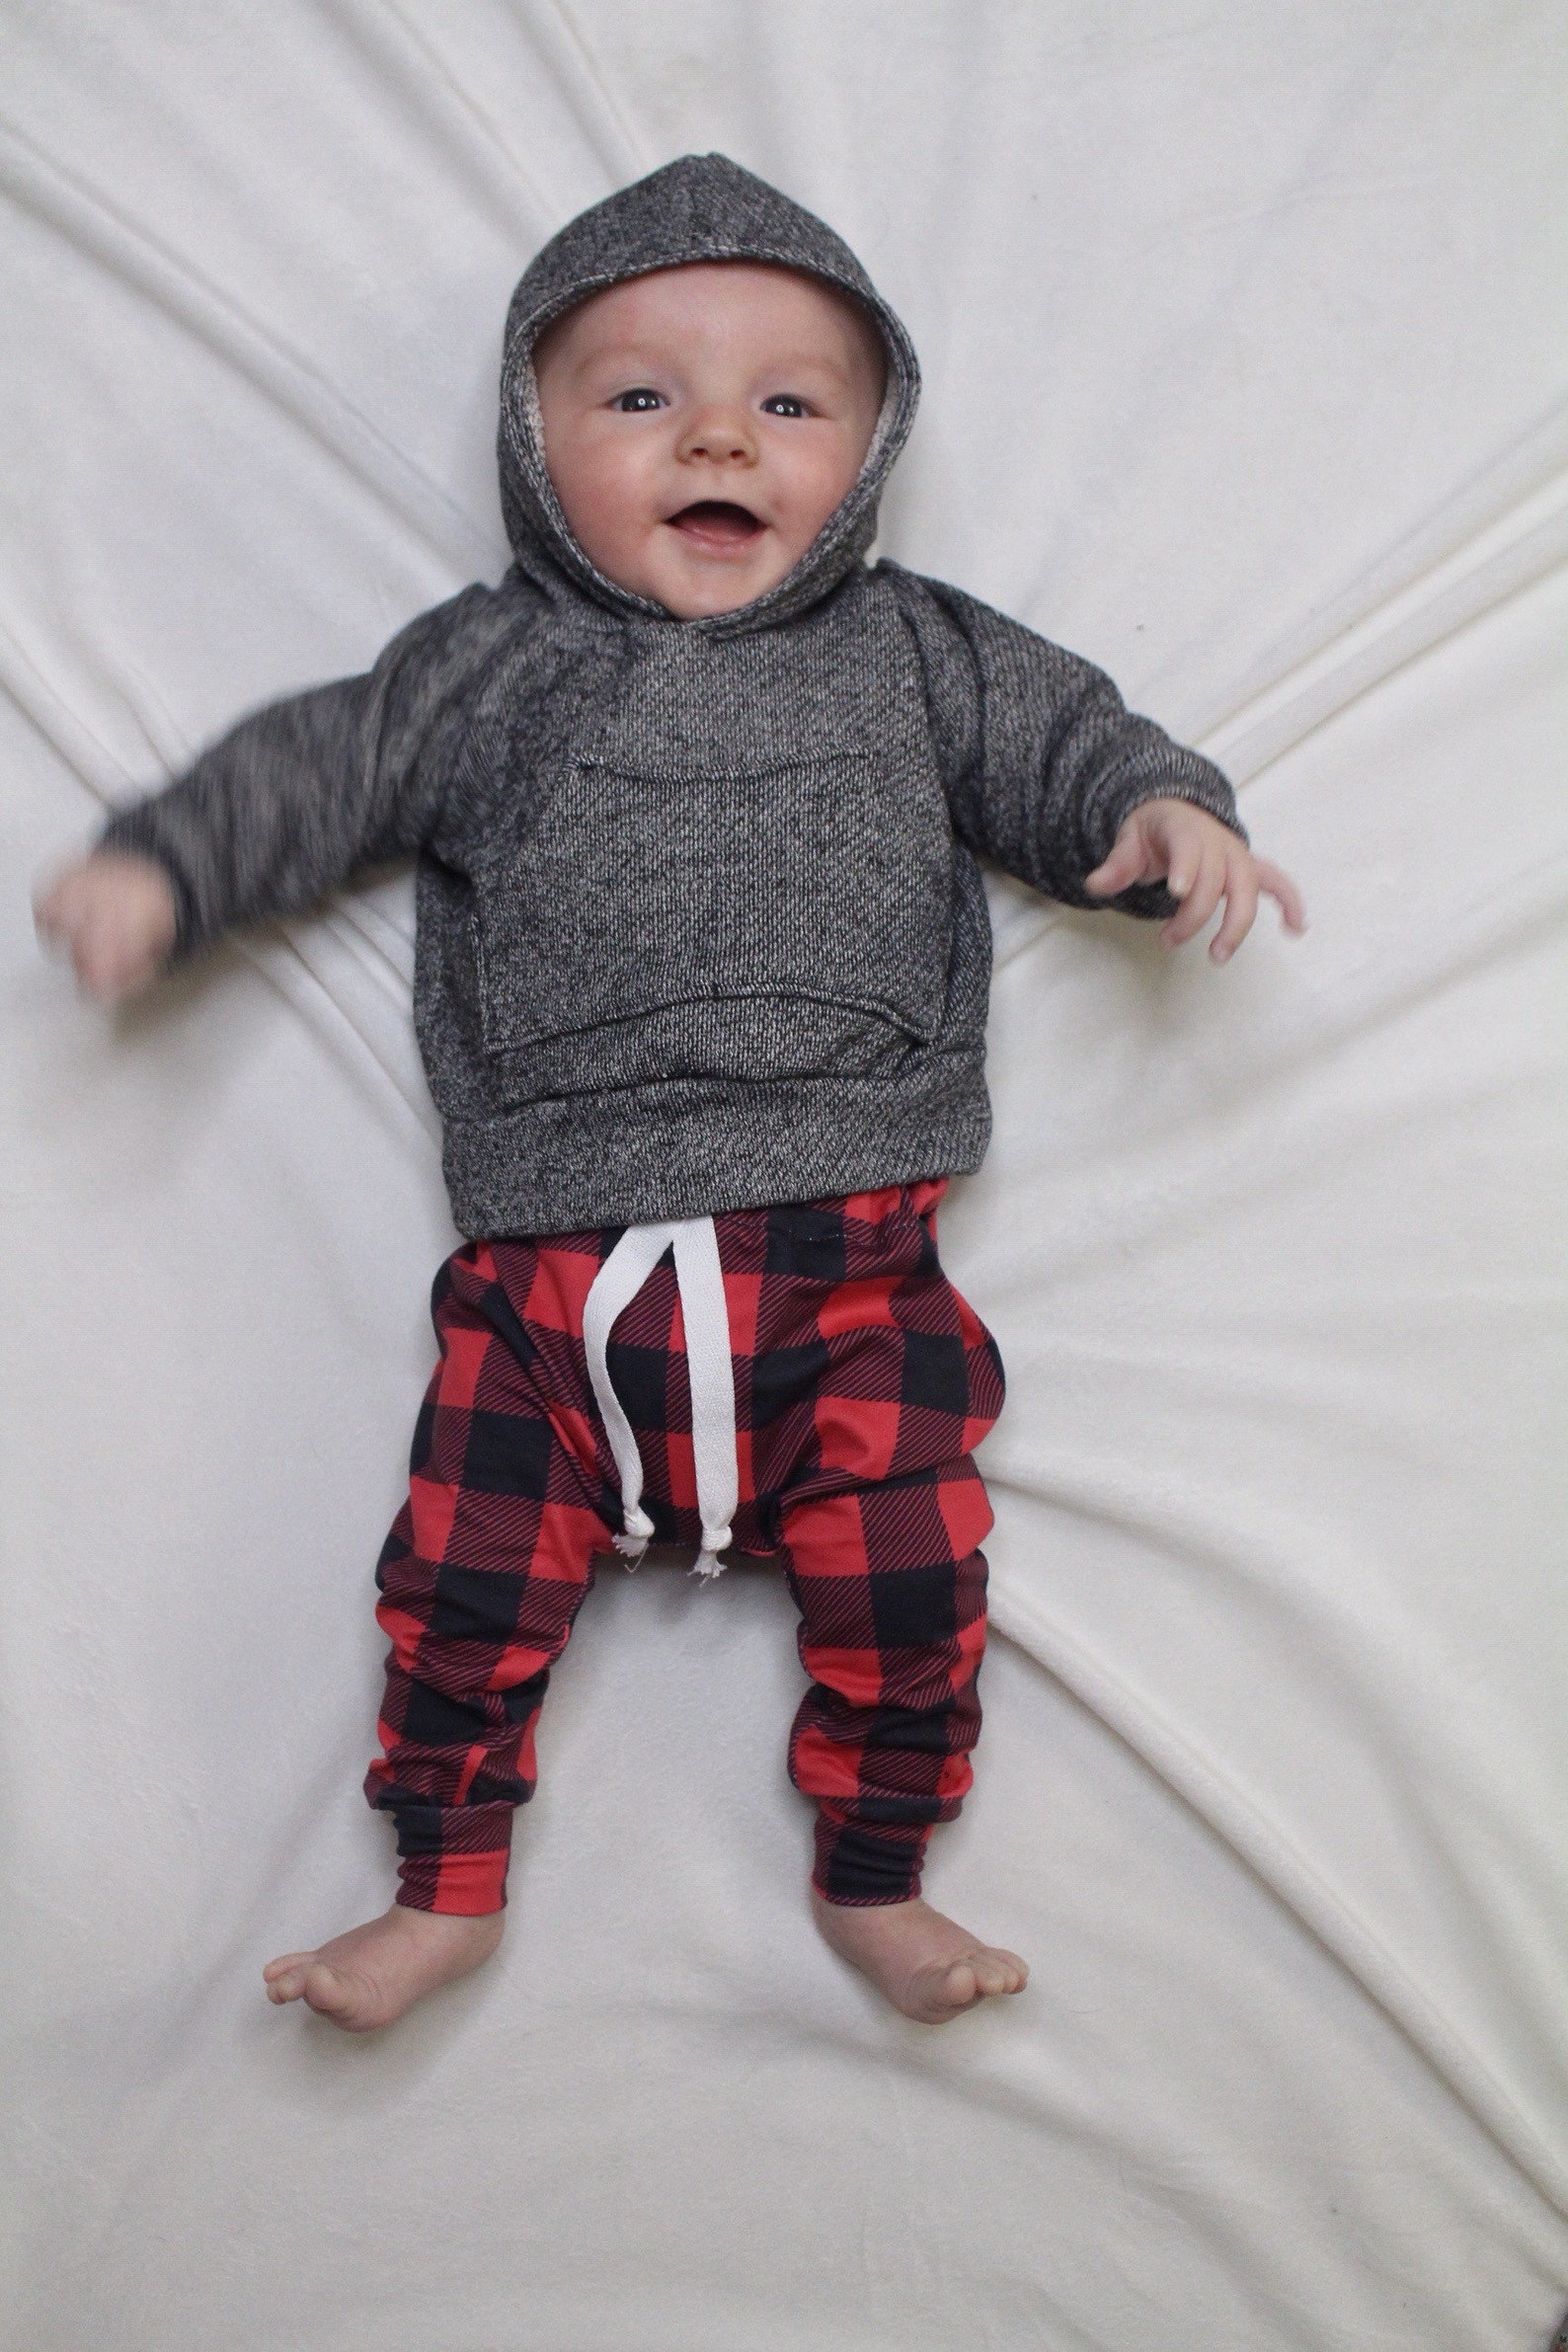 Buffalo plaid baby boy outfit charcoal hoodie black baby | Etsy